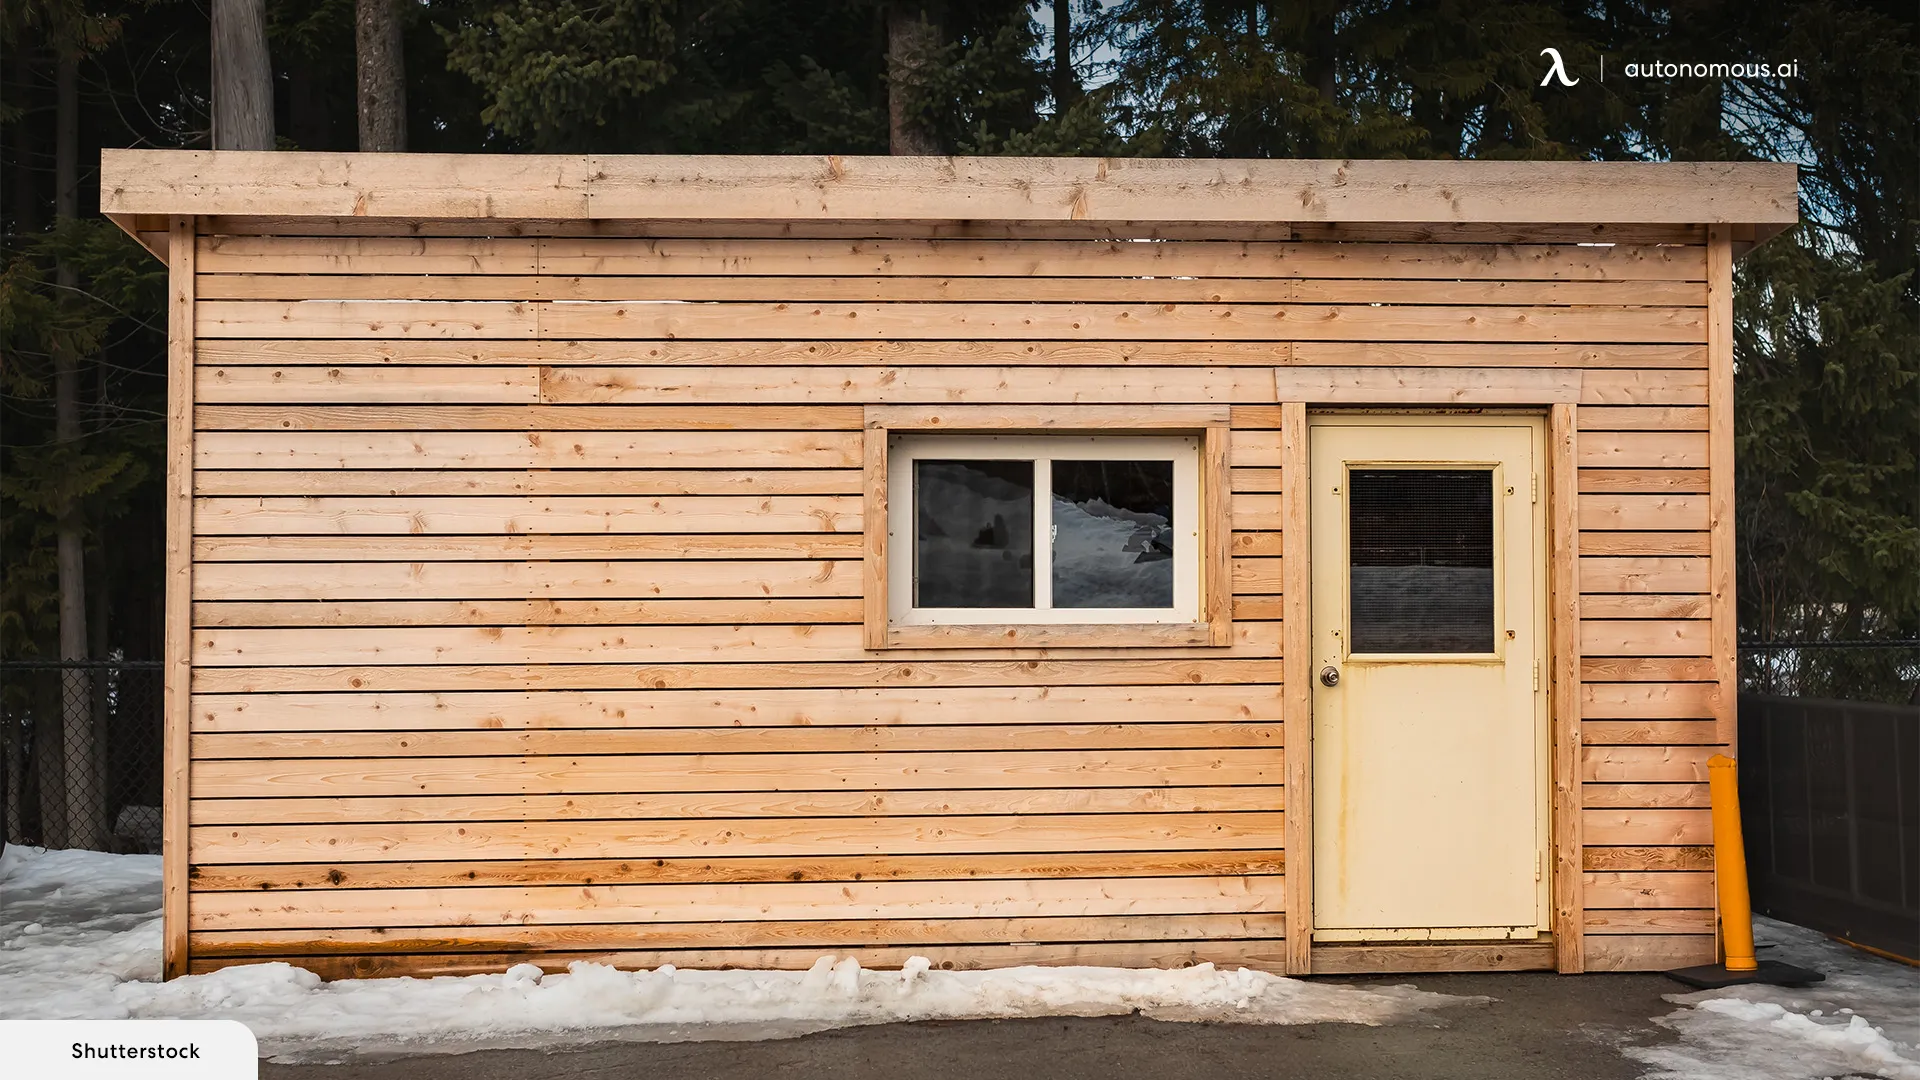 What Is a Rent-to-own Shed?